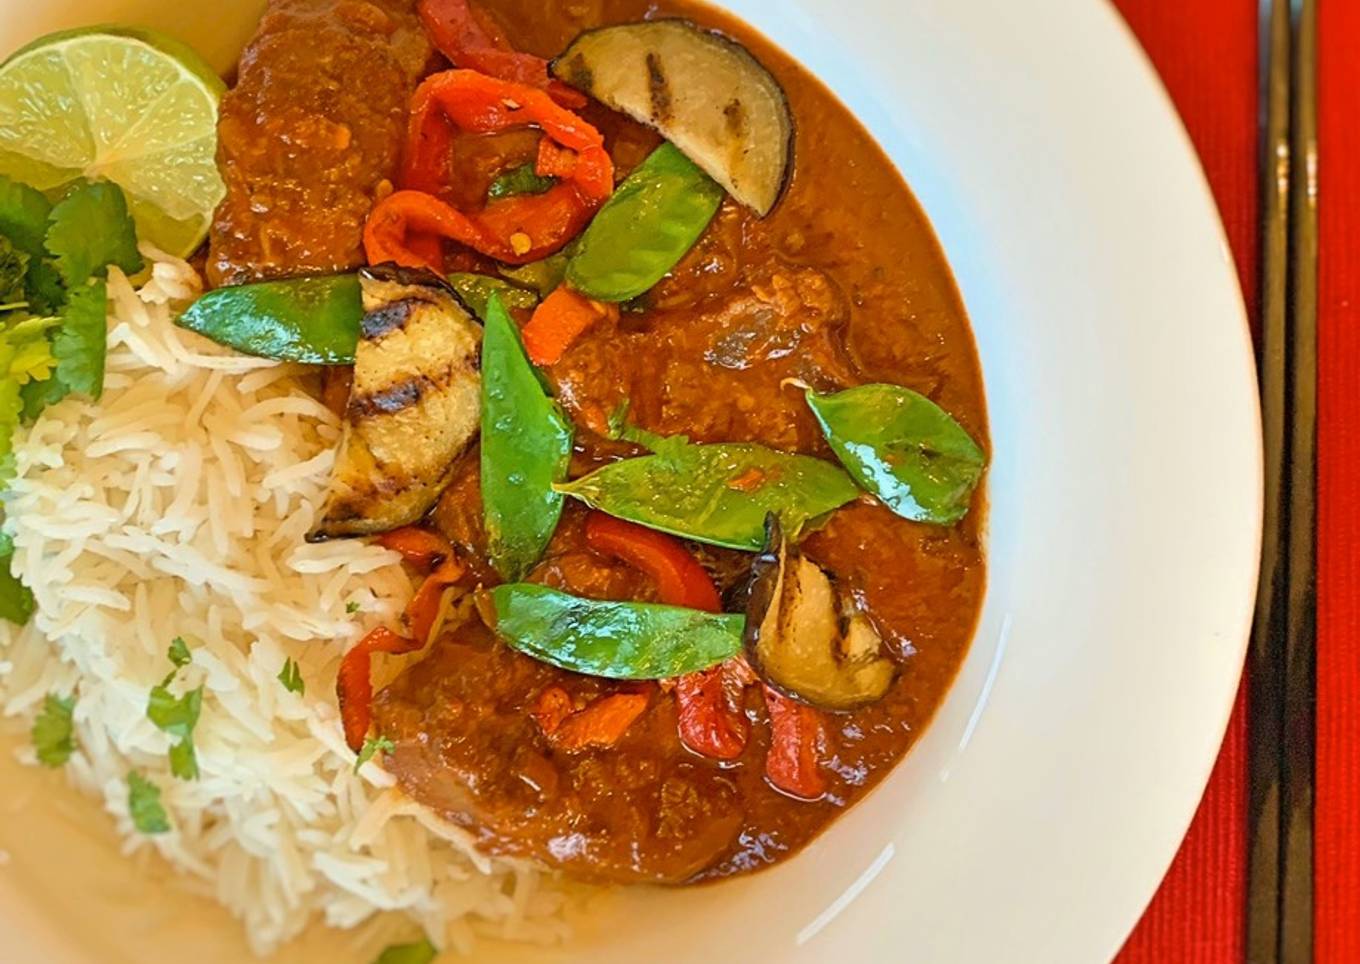 Slow cooked – Red Thai Beef Curry with Veggies